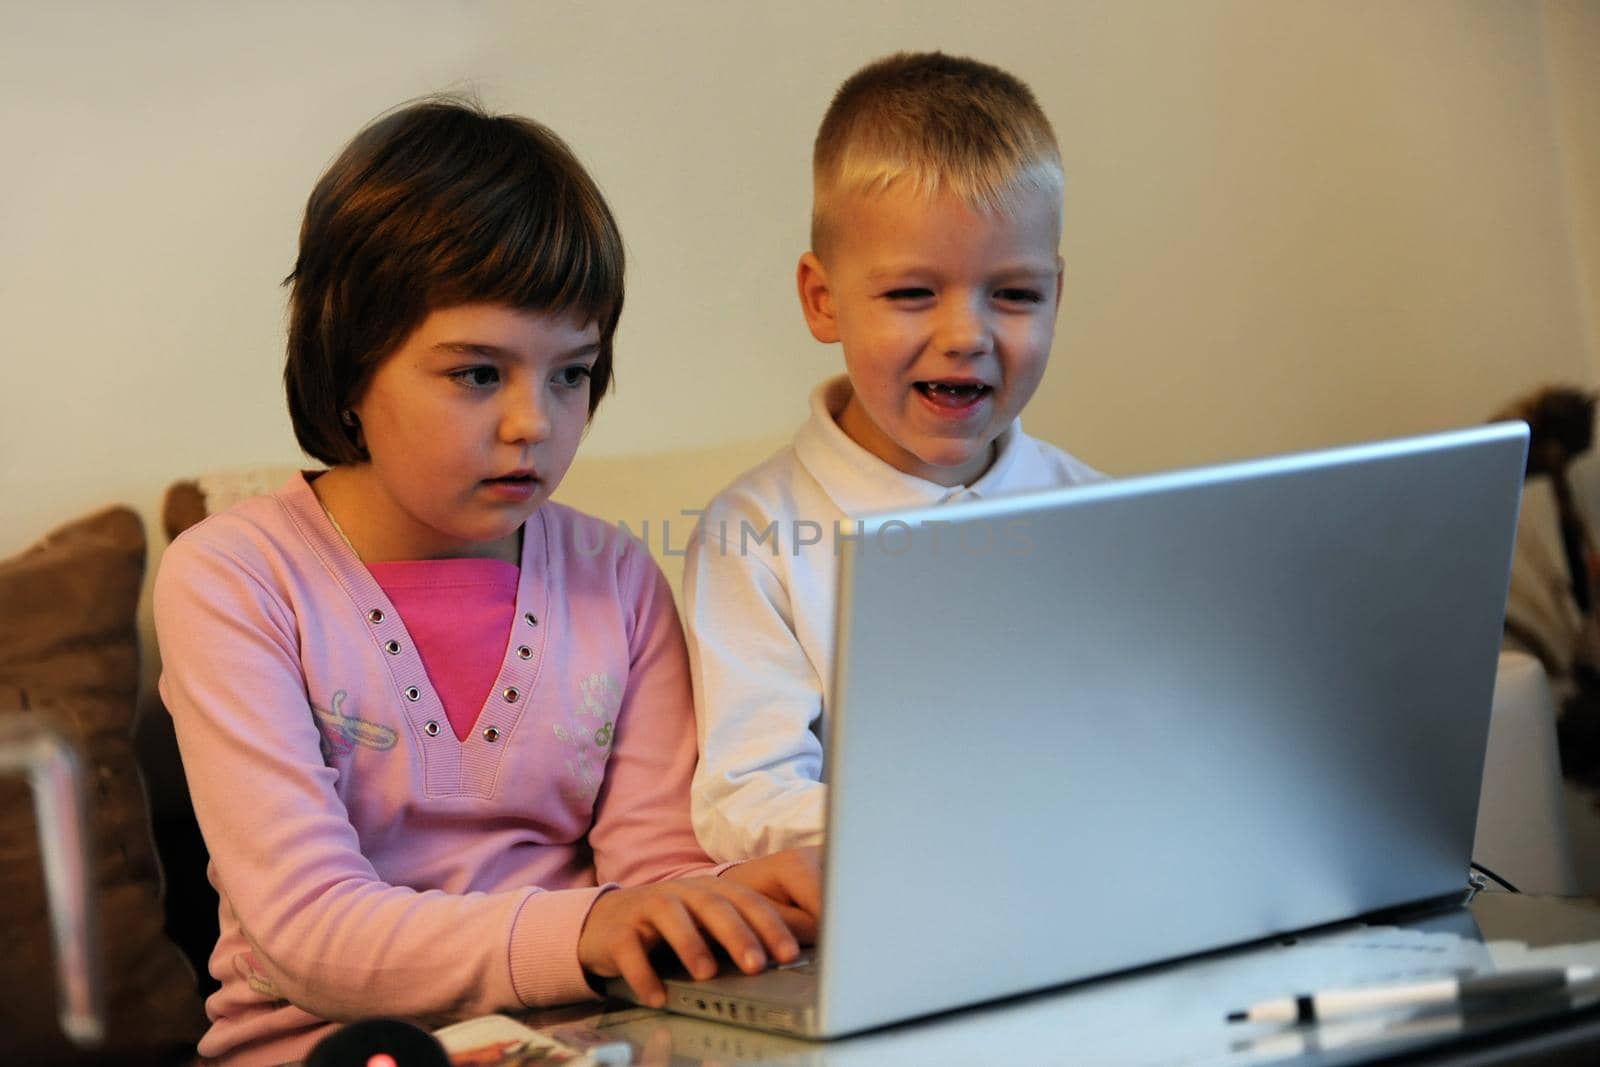 childrens have fun and playing games on laptop computer by dotshock